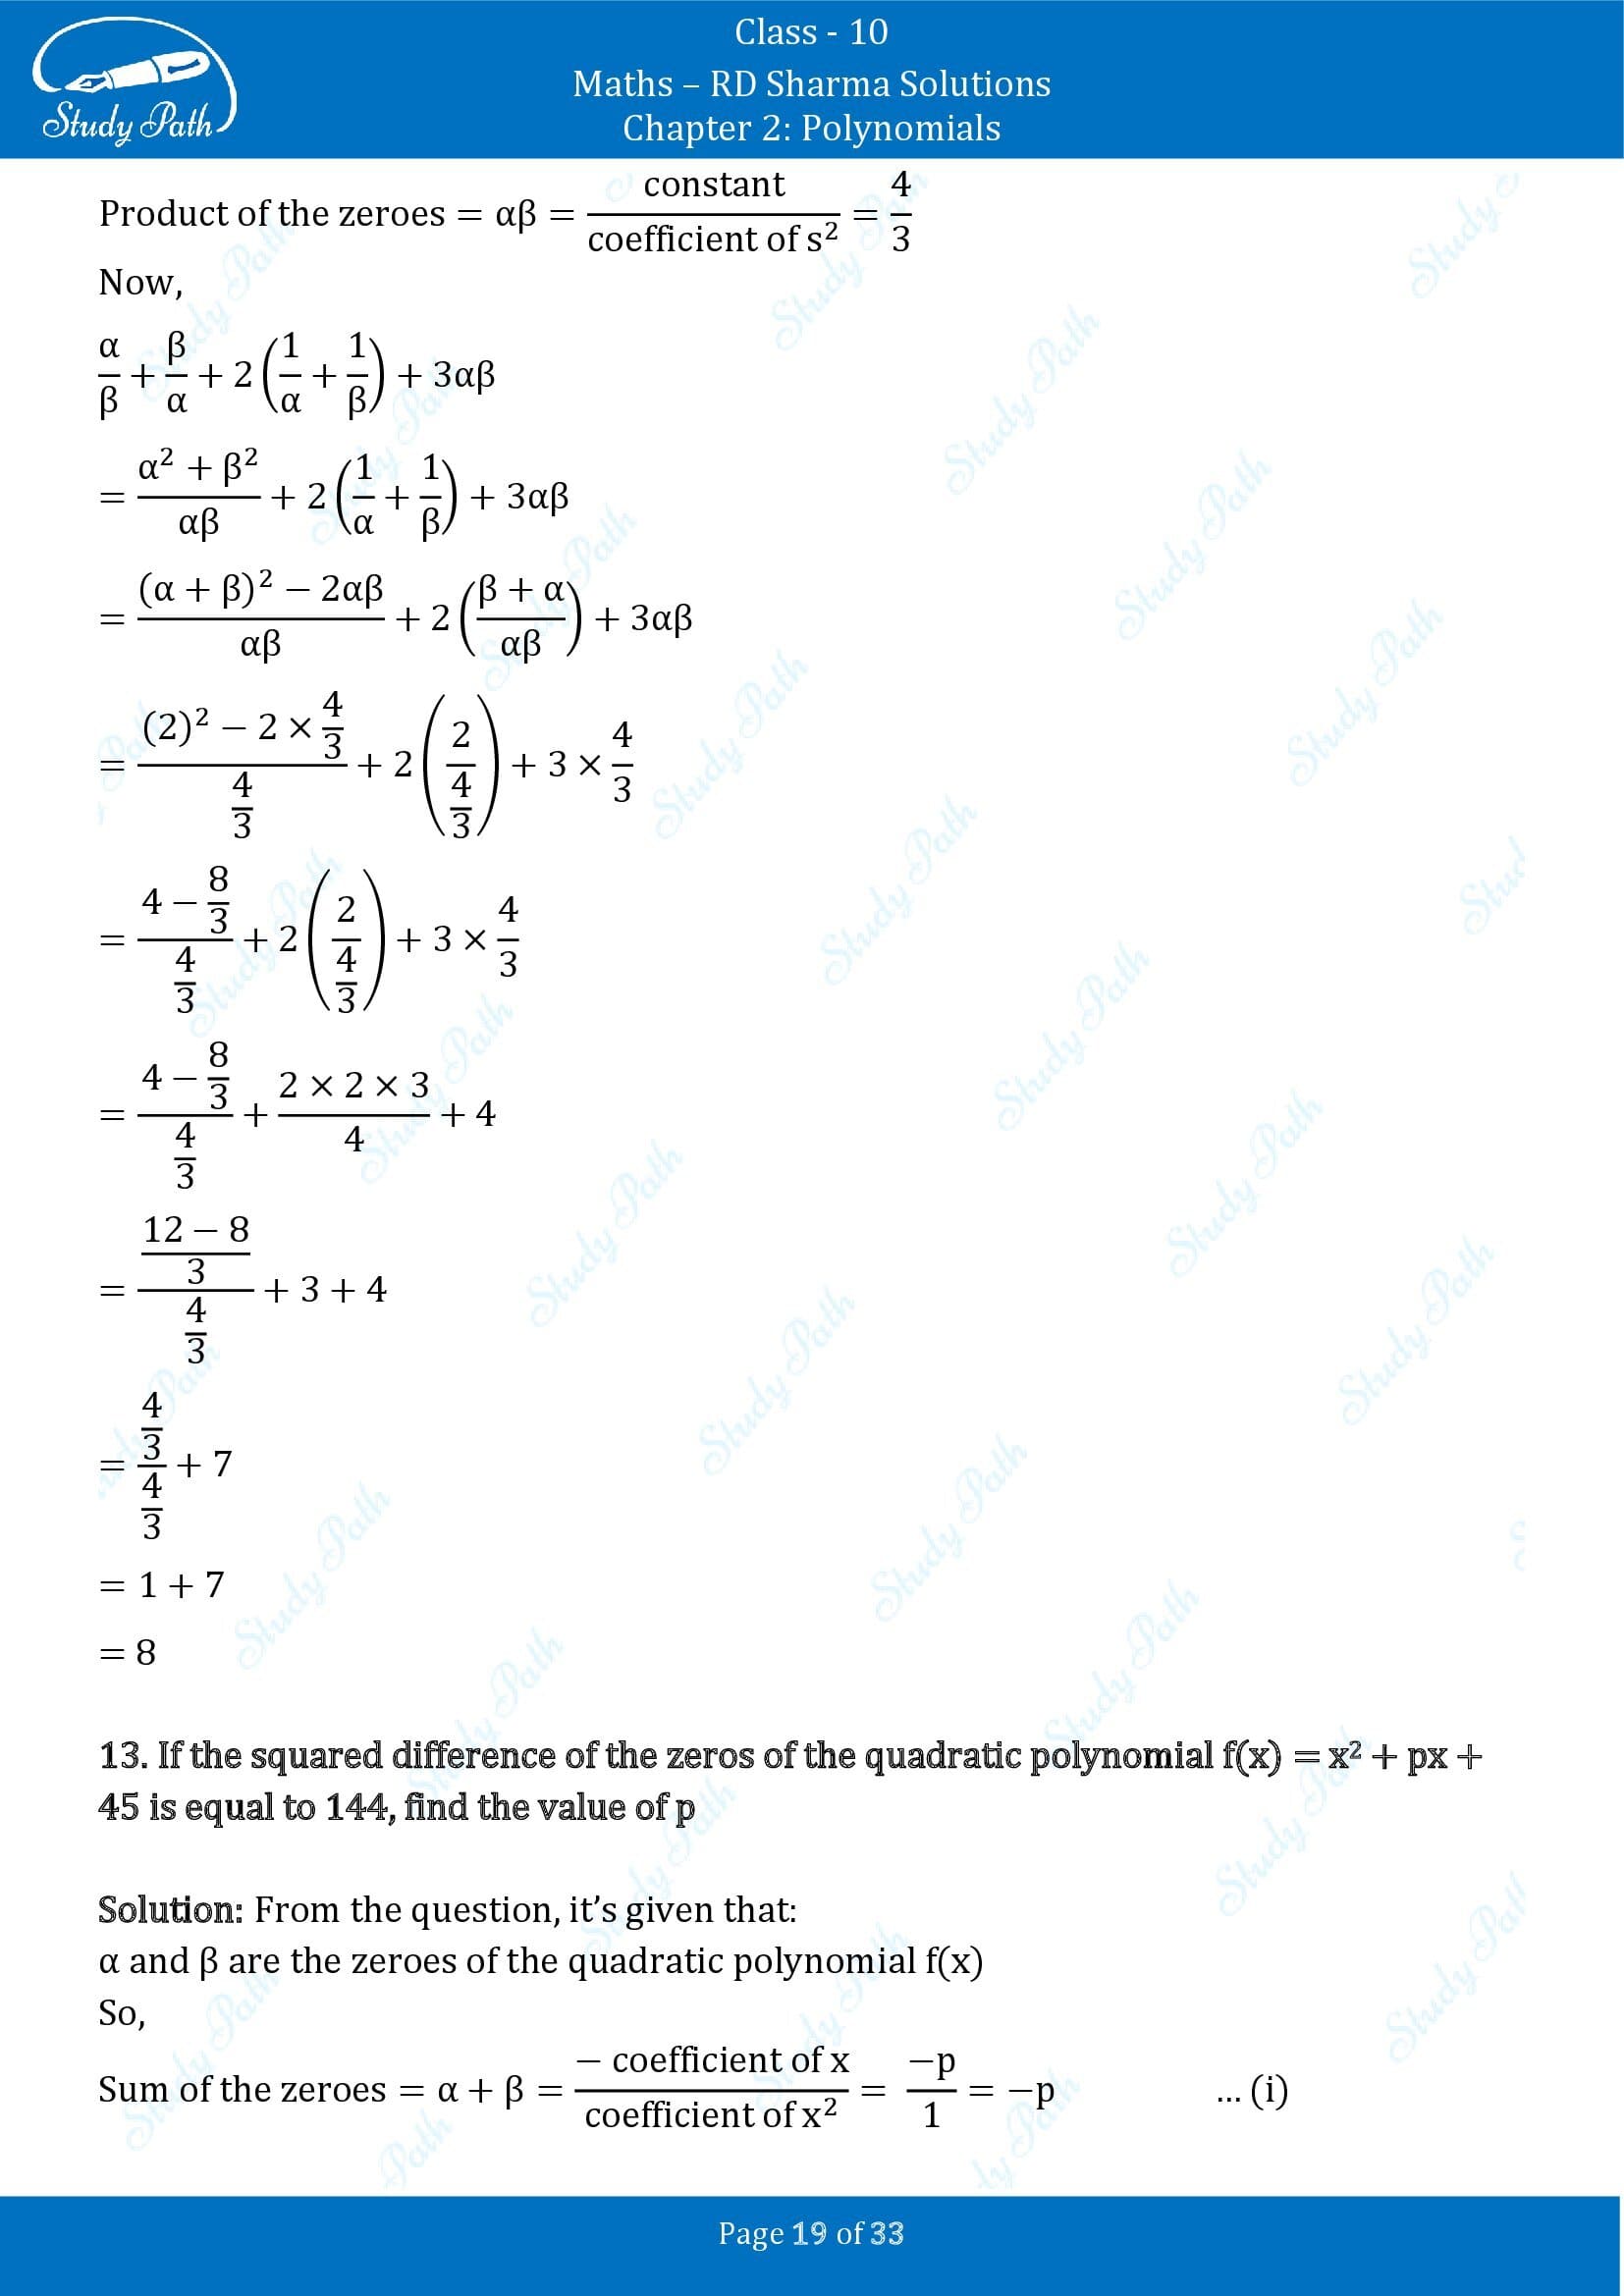 RD Sharma Solutions Class 10 Chapter 2 Polynomials Exercise 2.1 00019